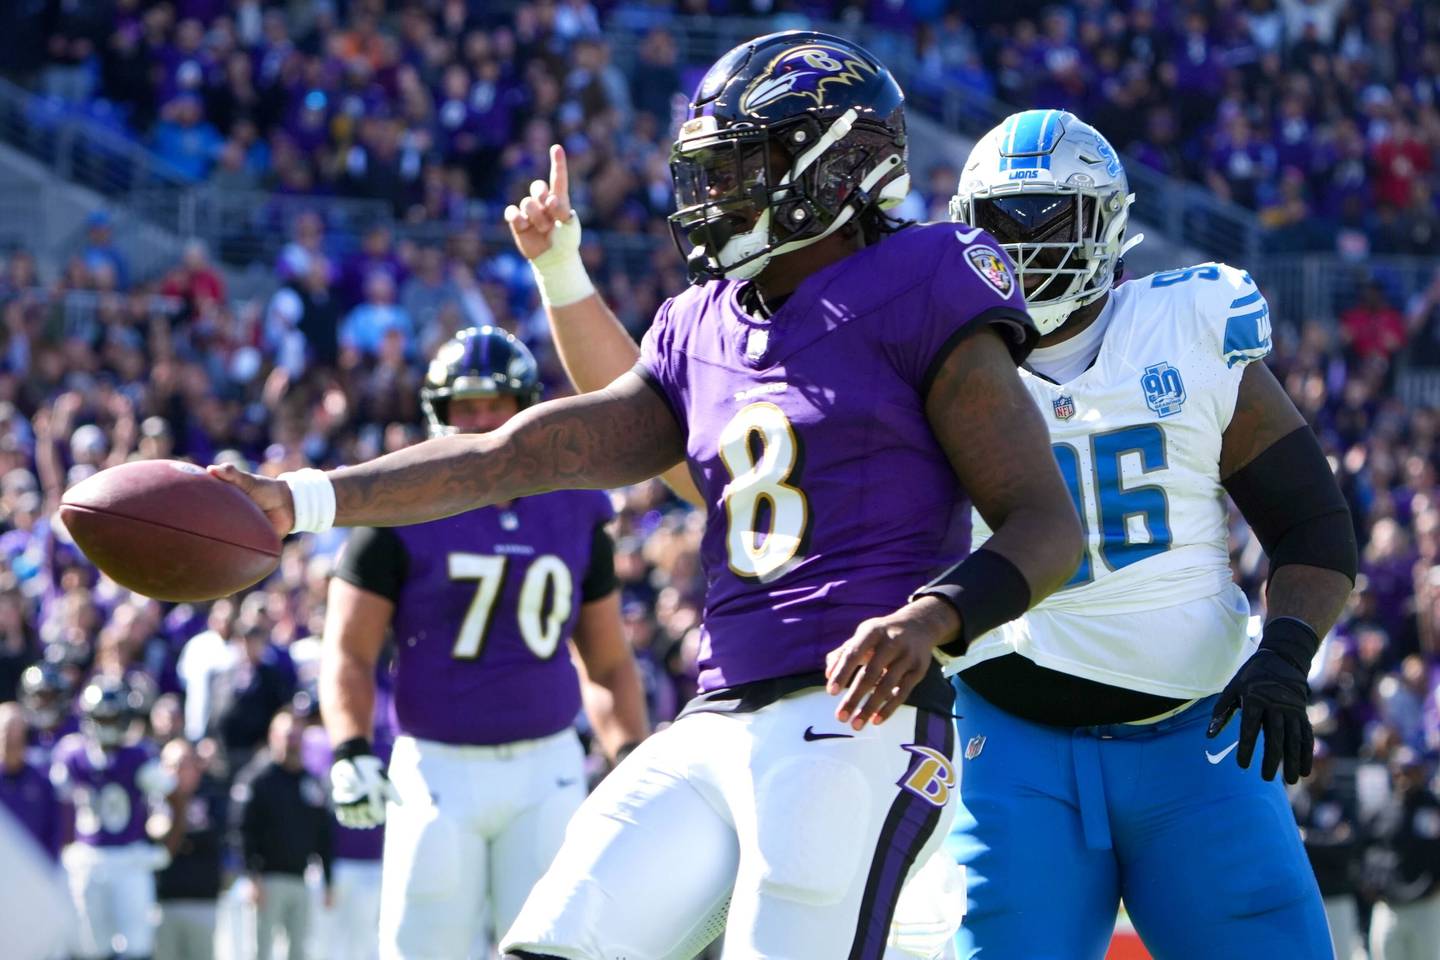 Ravens QB Lamar Jackson extends the ball as he crosses the line to score a touchdown in the first half of Baltimore's 38-6 win against the Lions at M&T Bank Stadium.